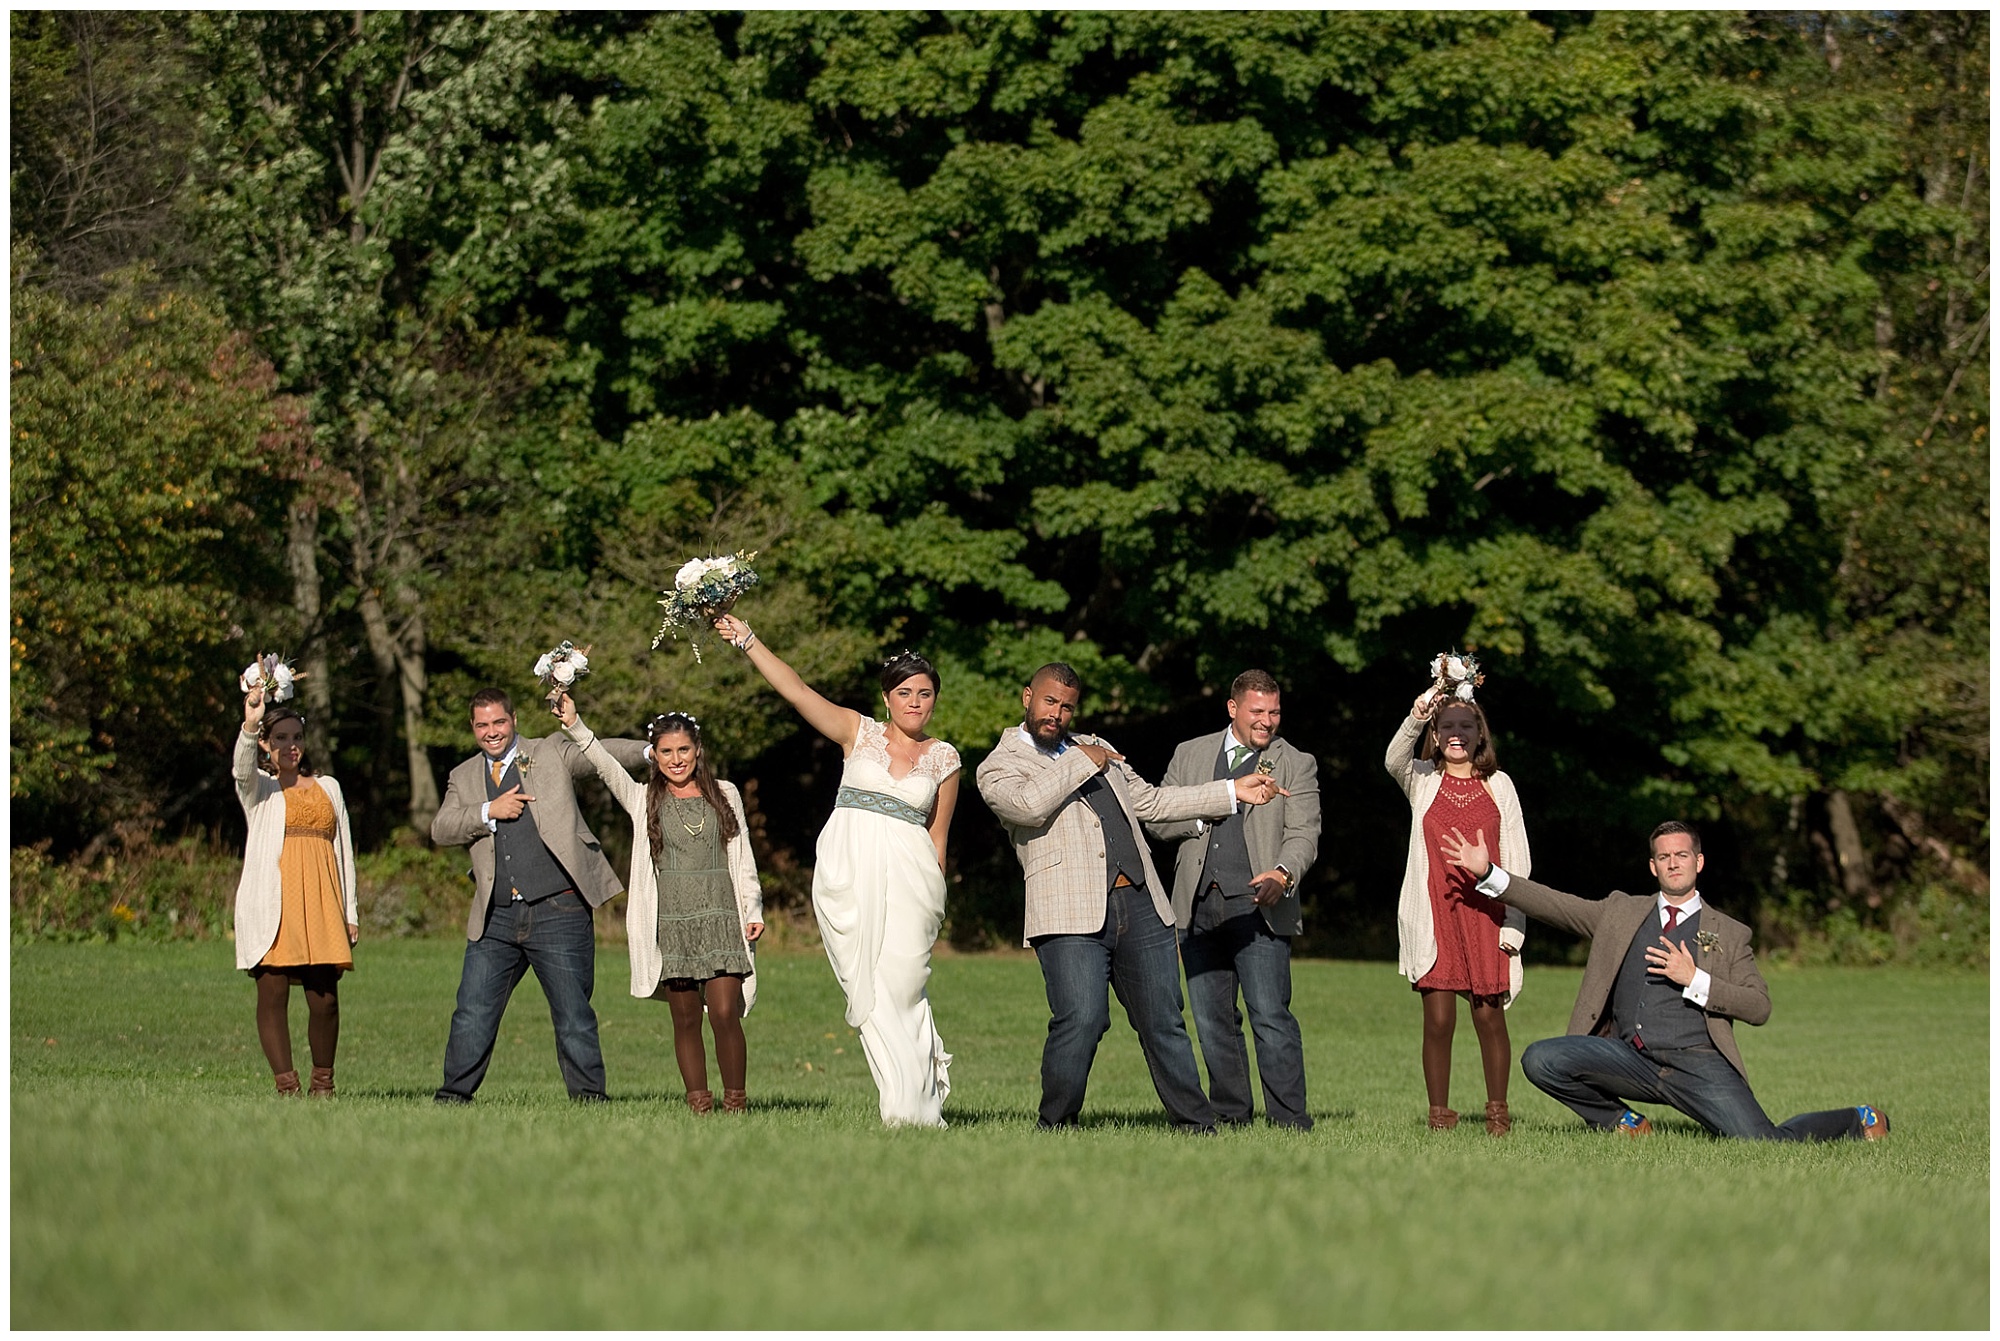 Wedding party photo with hands in the air and playing to the camera